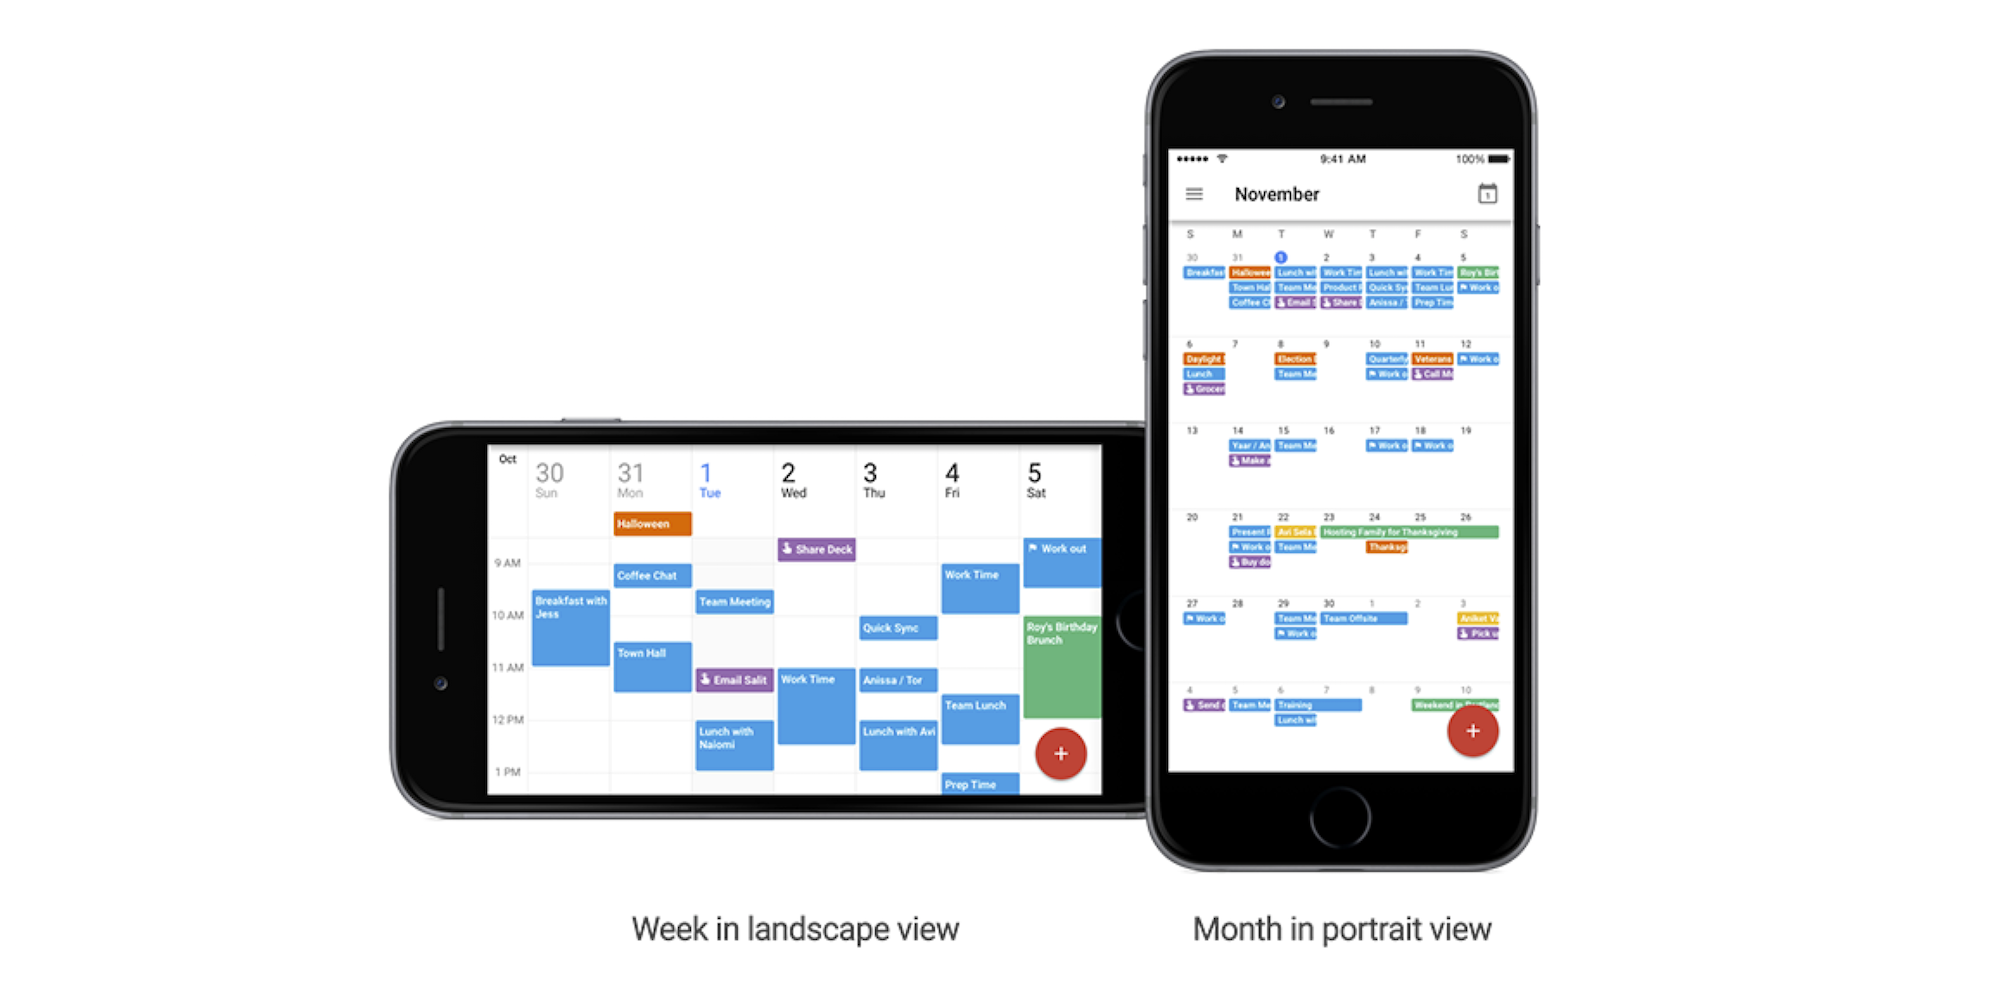 google-calendar-for-iphone-adds-spotlight-search-month-view-week-view